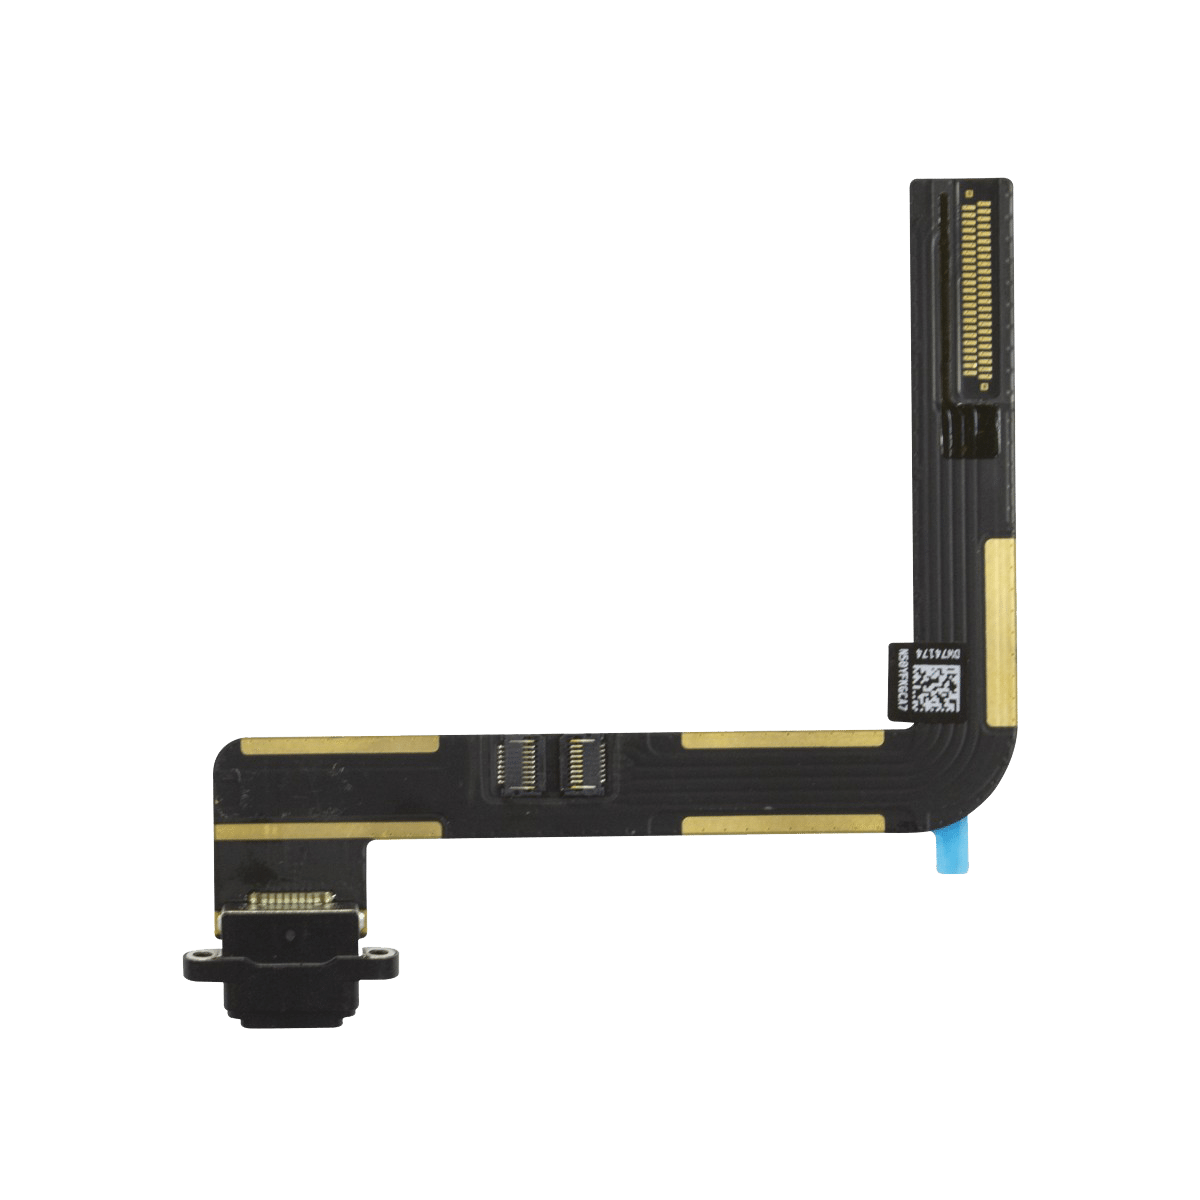 iPad Air / 5 / 6 Charging/Dock Port Flex Cable Replacement